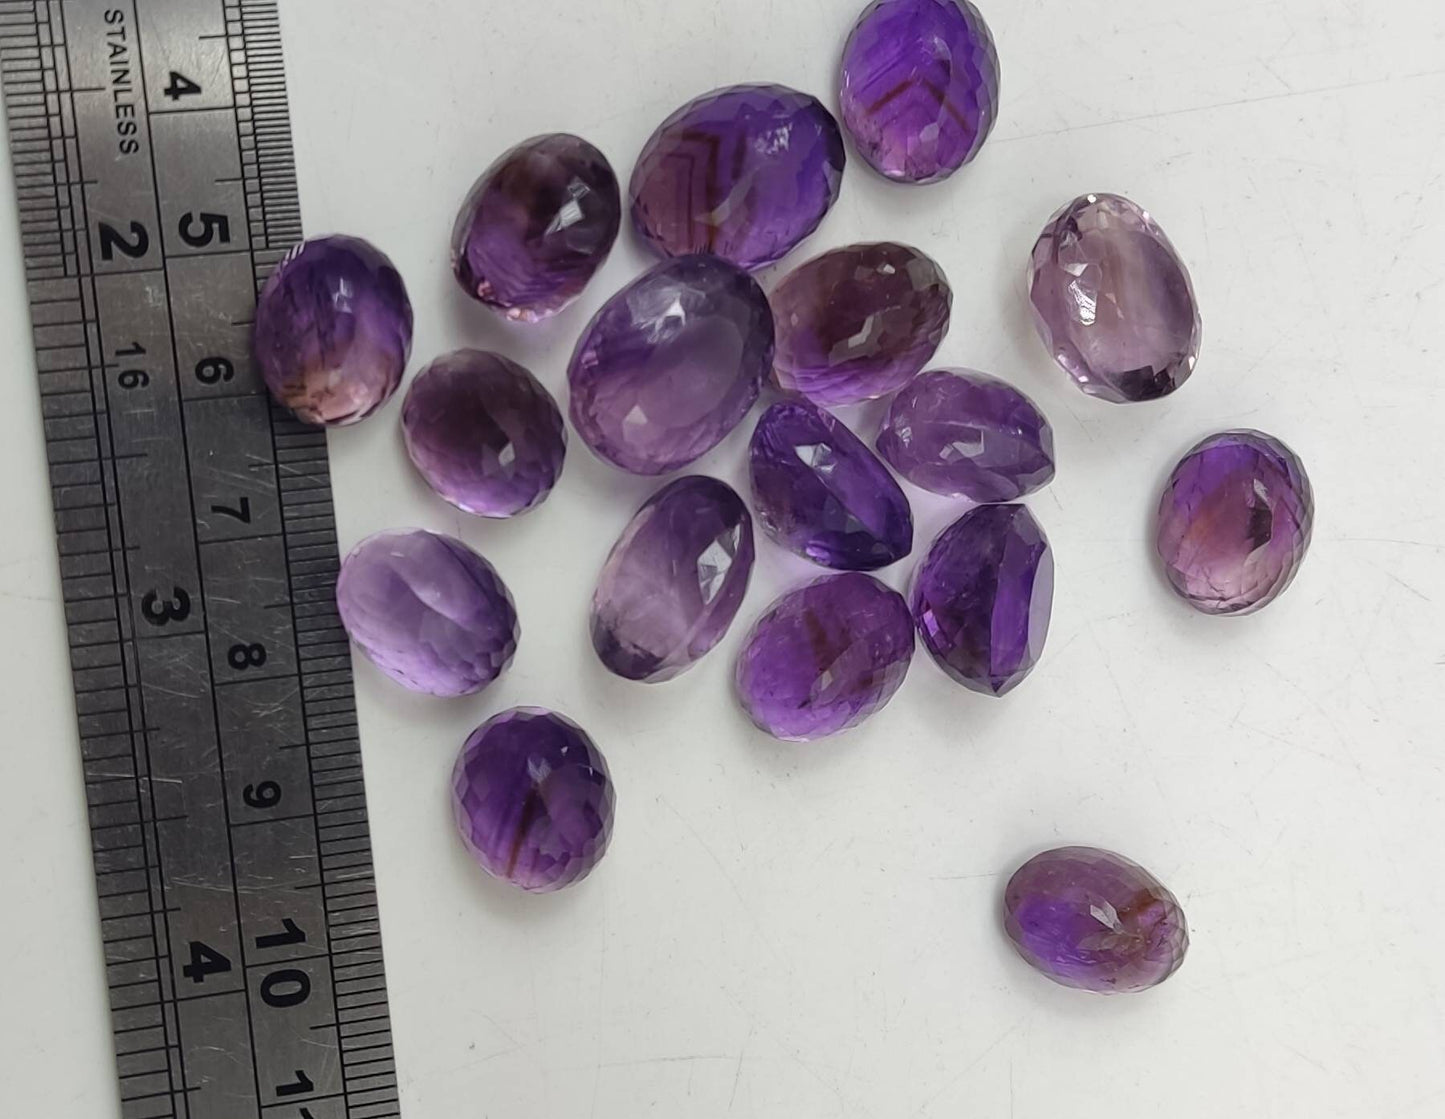 An amazing lot of faceted Amethyst gemstones 17 pieces 186 carats weight